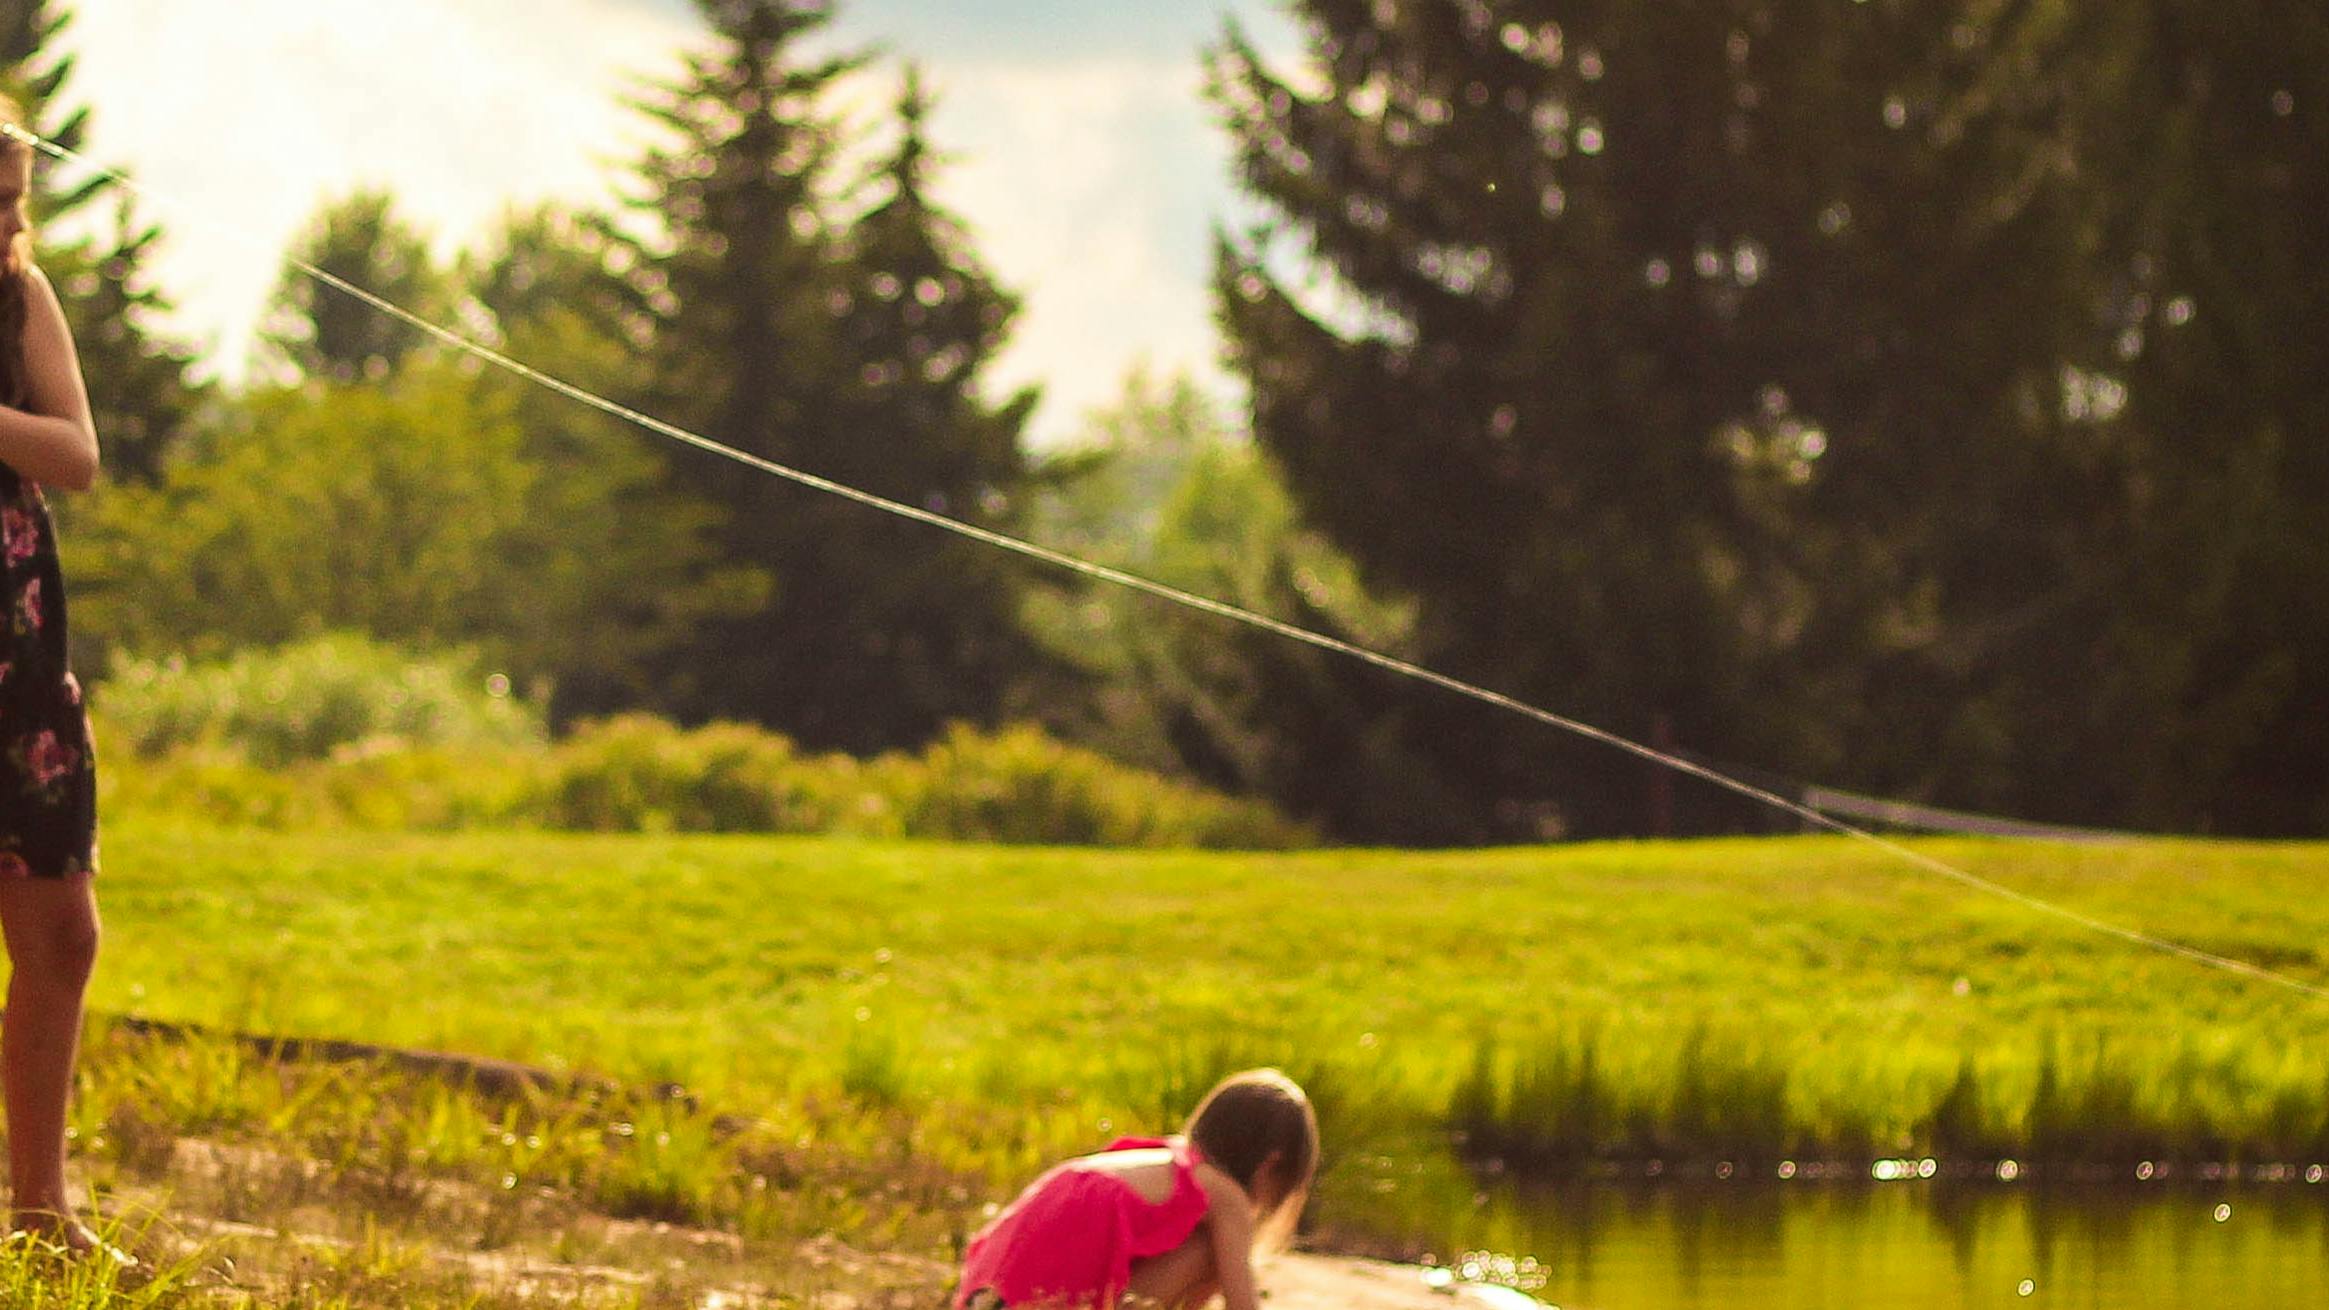 A girl in a dress stands barefoot on the grassy banks of a pond and pulls back a fishing rod. Another younger girl crouches and plays in the mud.